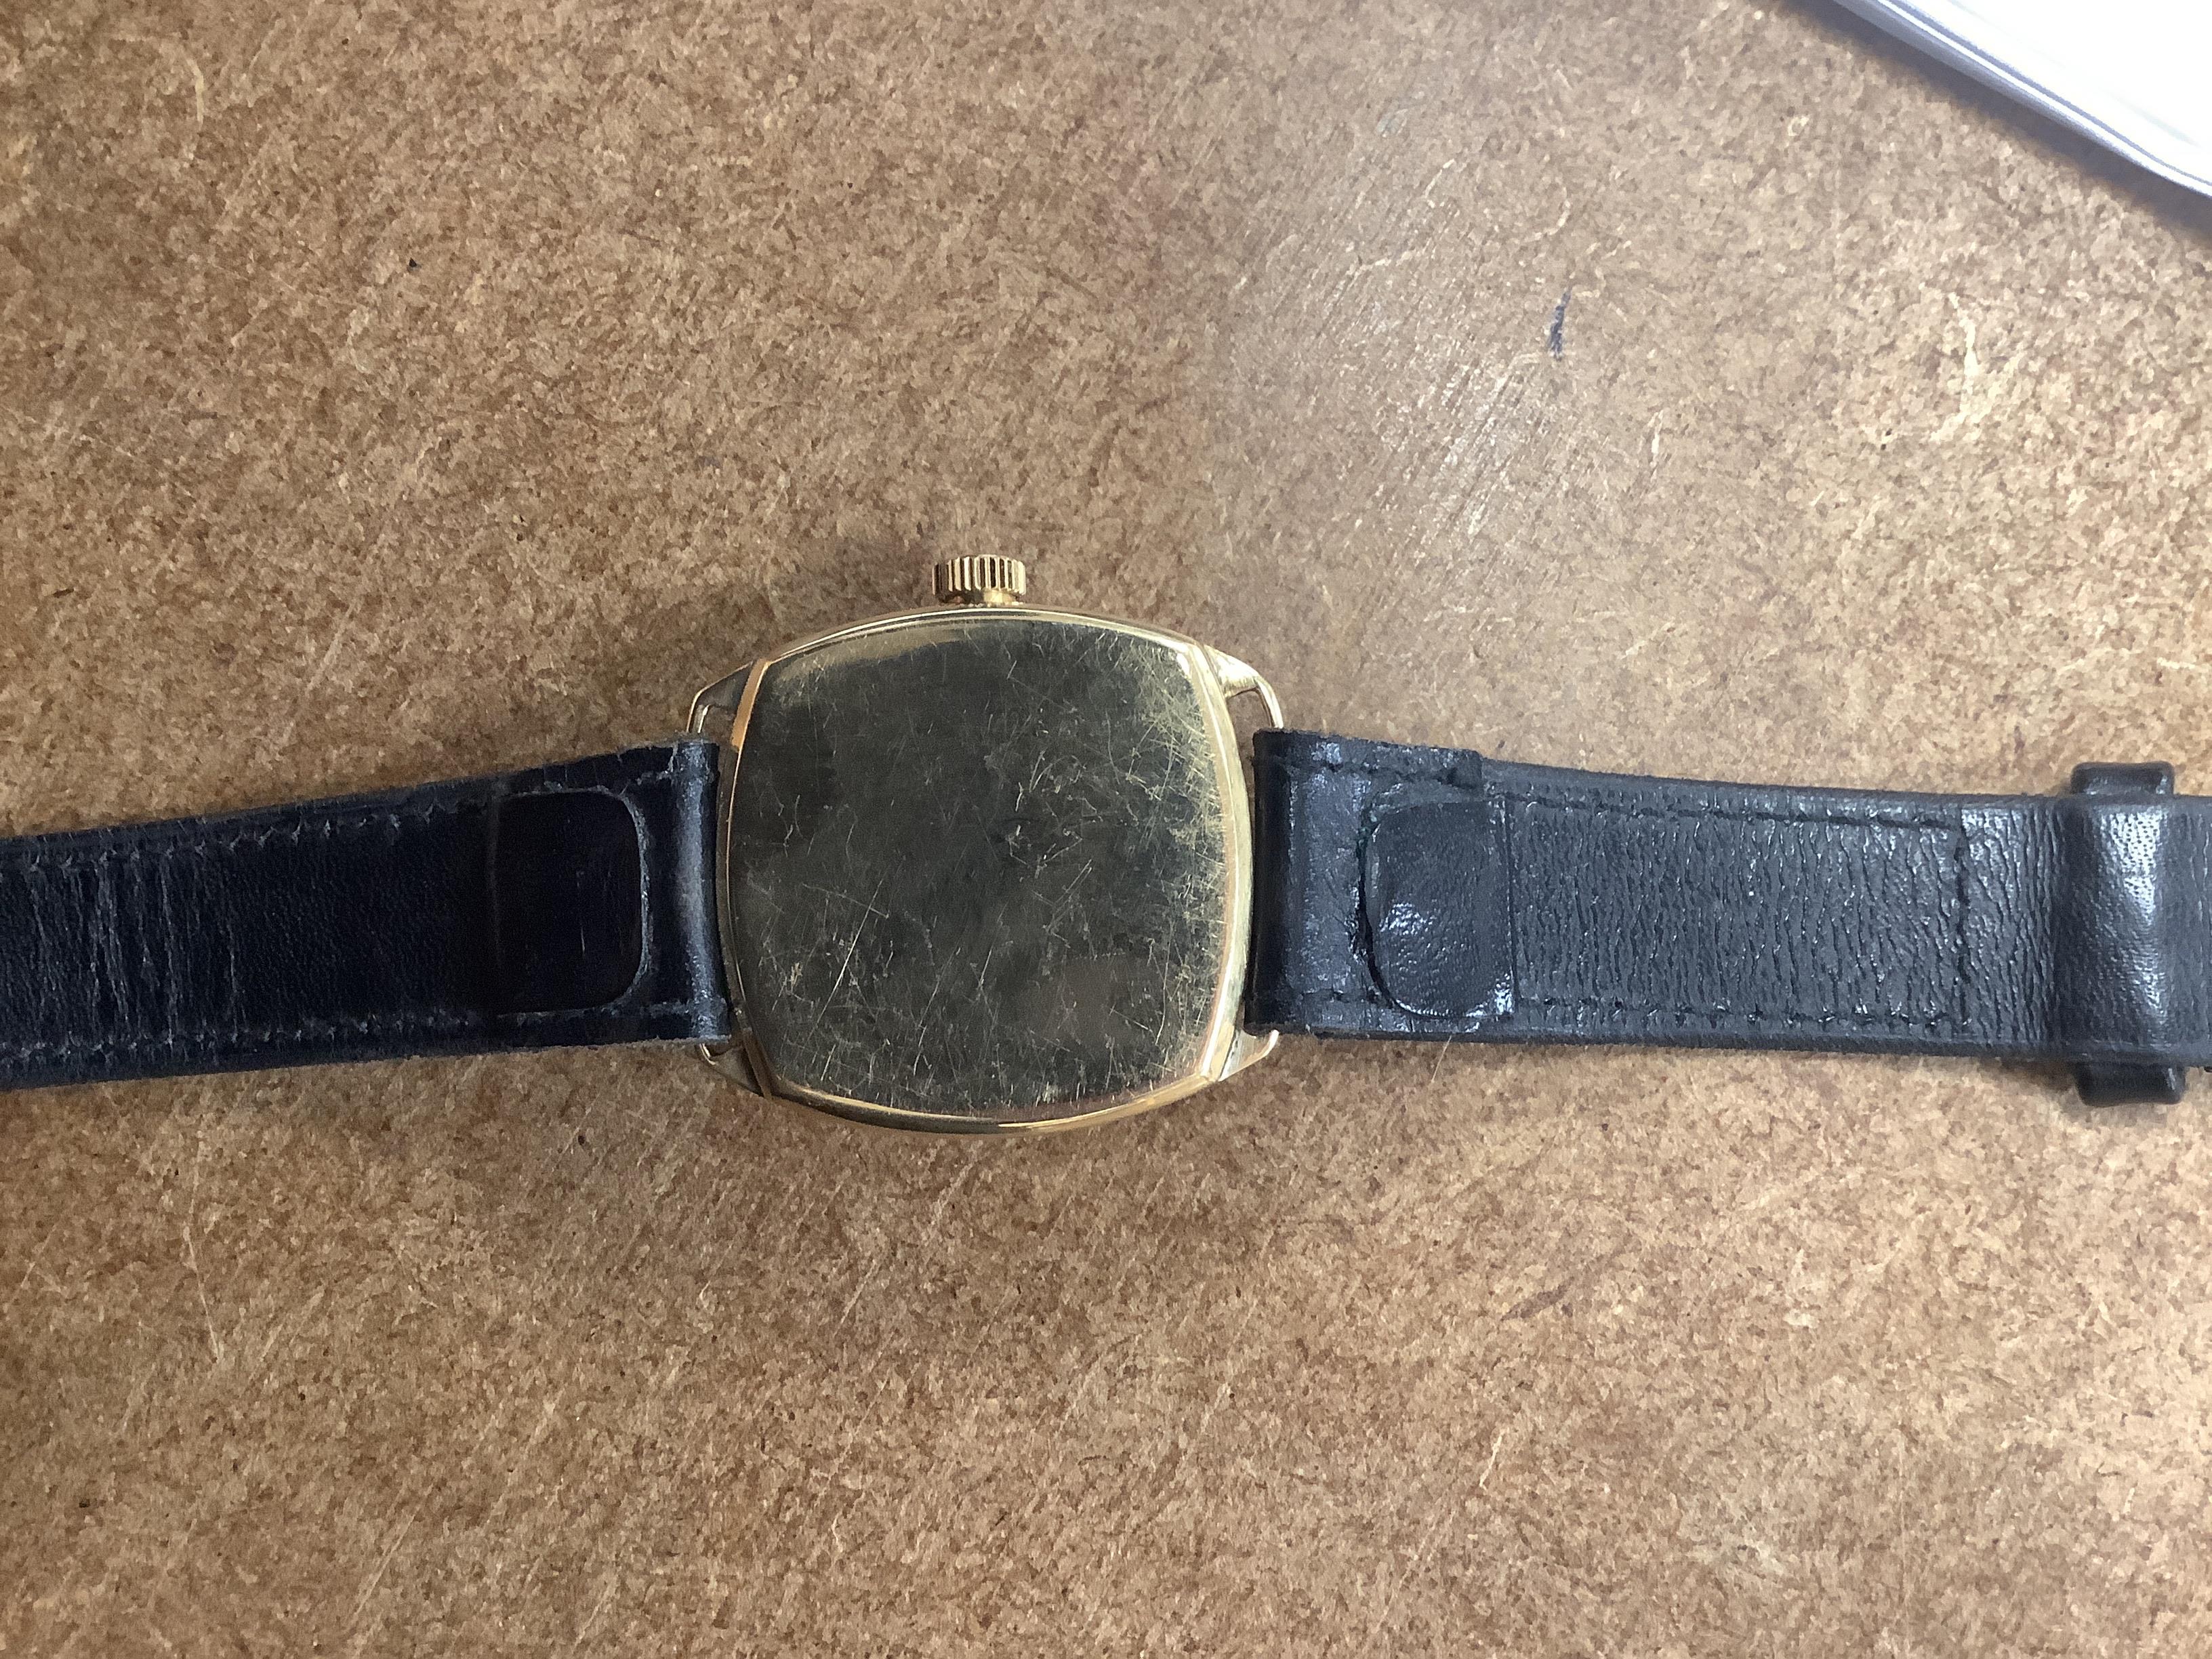 A gentleman's yellow metal J.W. Benson manual wrist watch, with Arabic dial and subsidiary seconds, on a black leather strap.